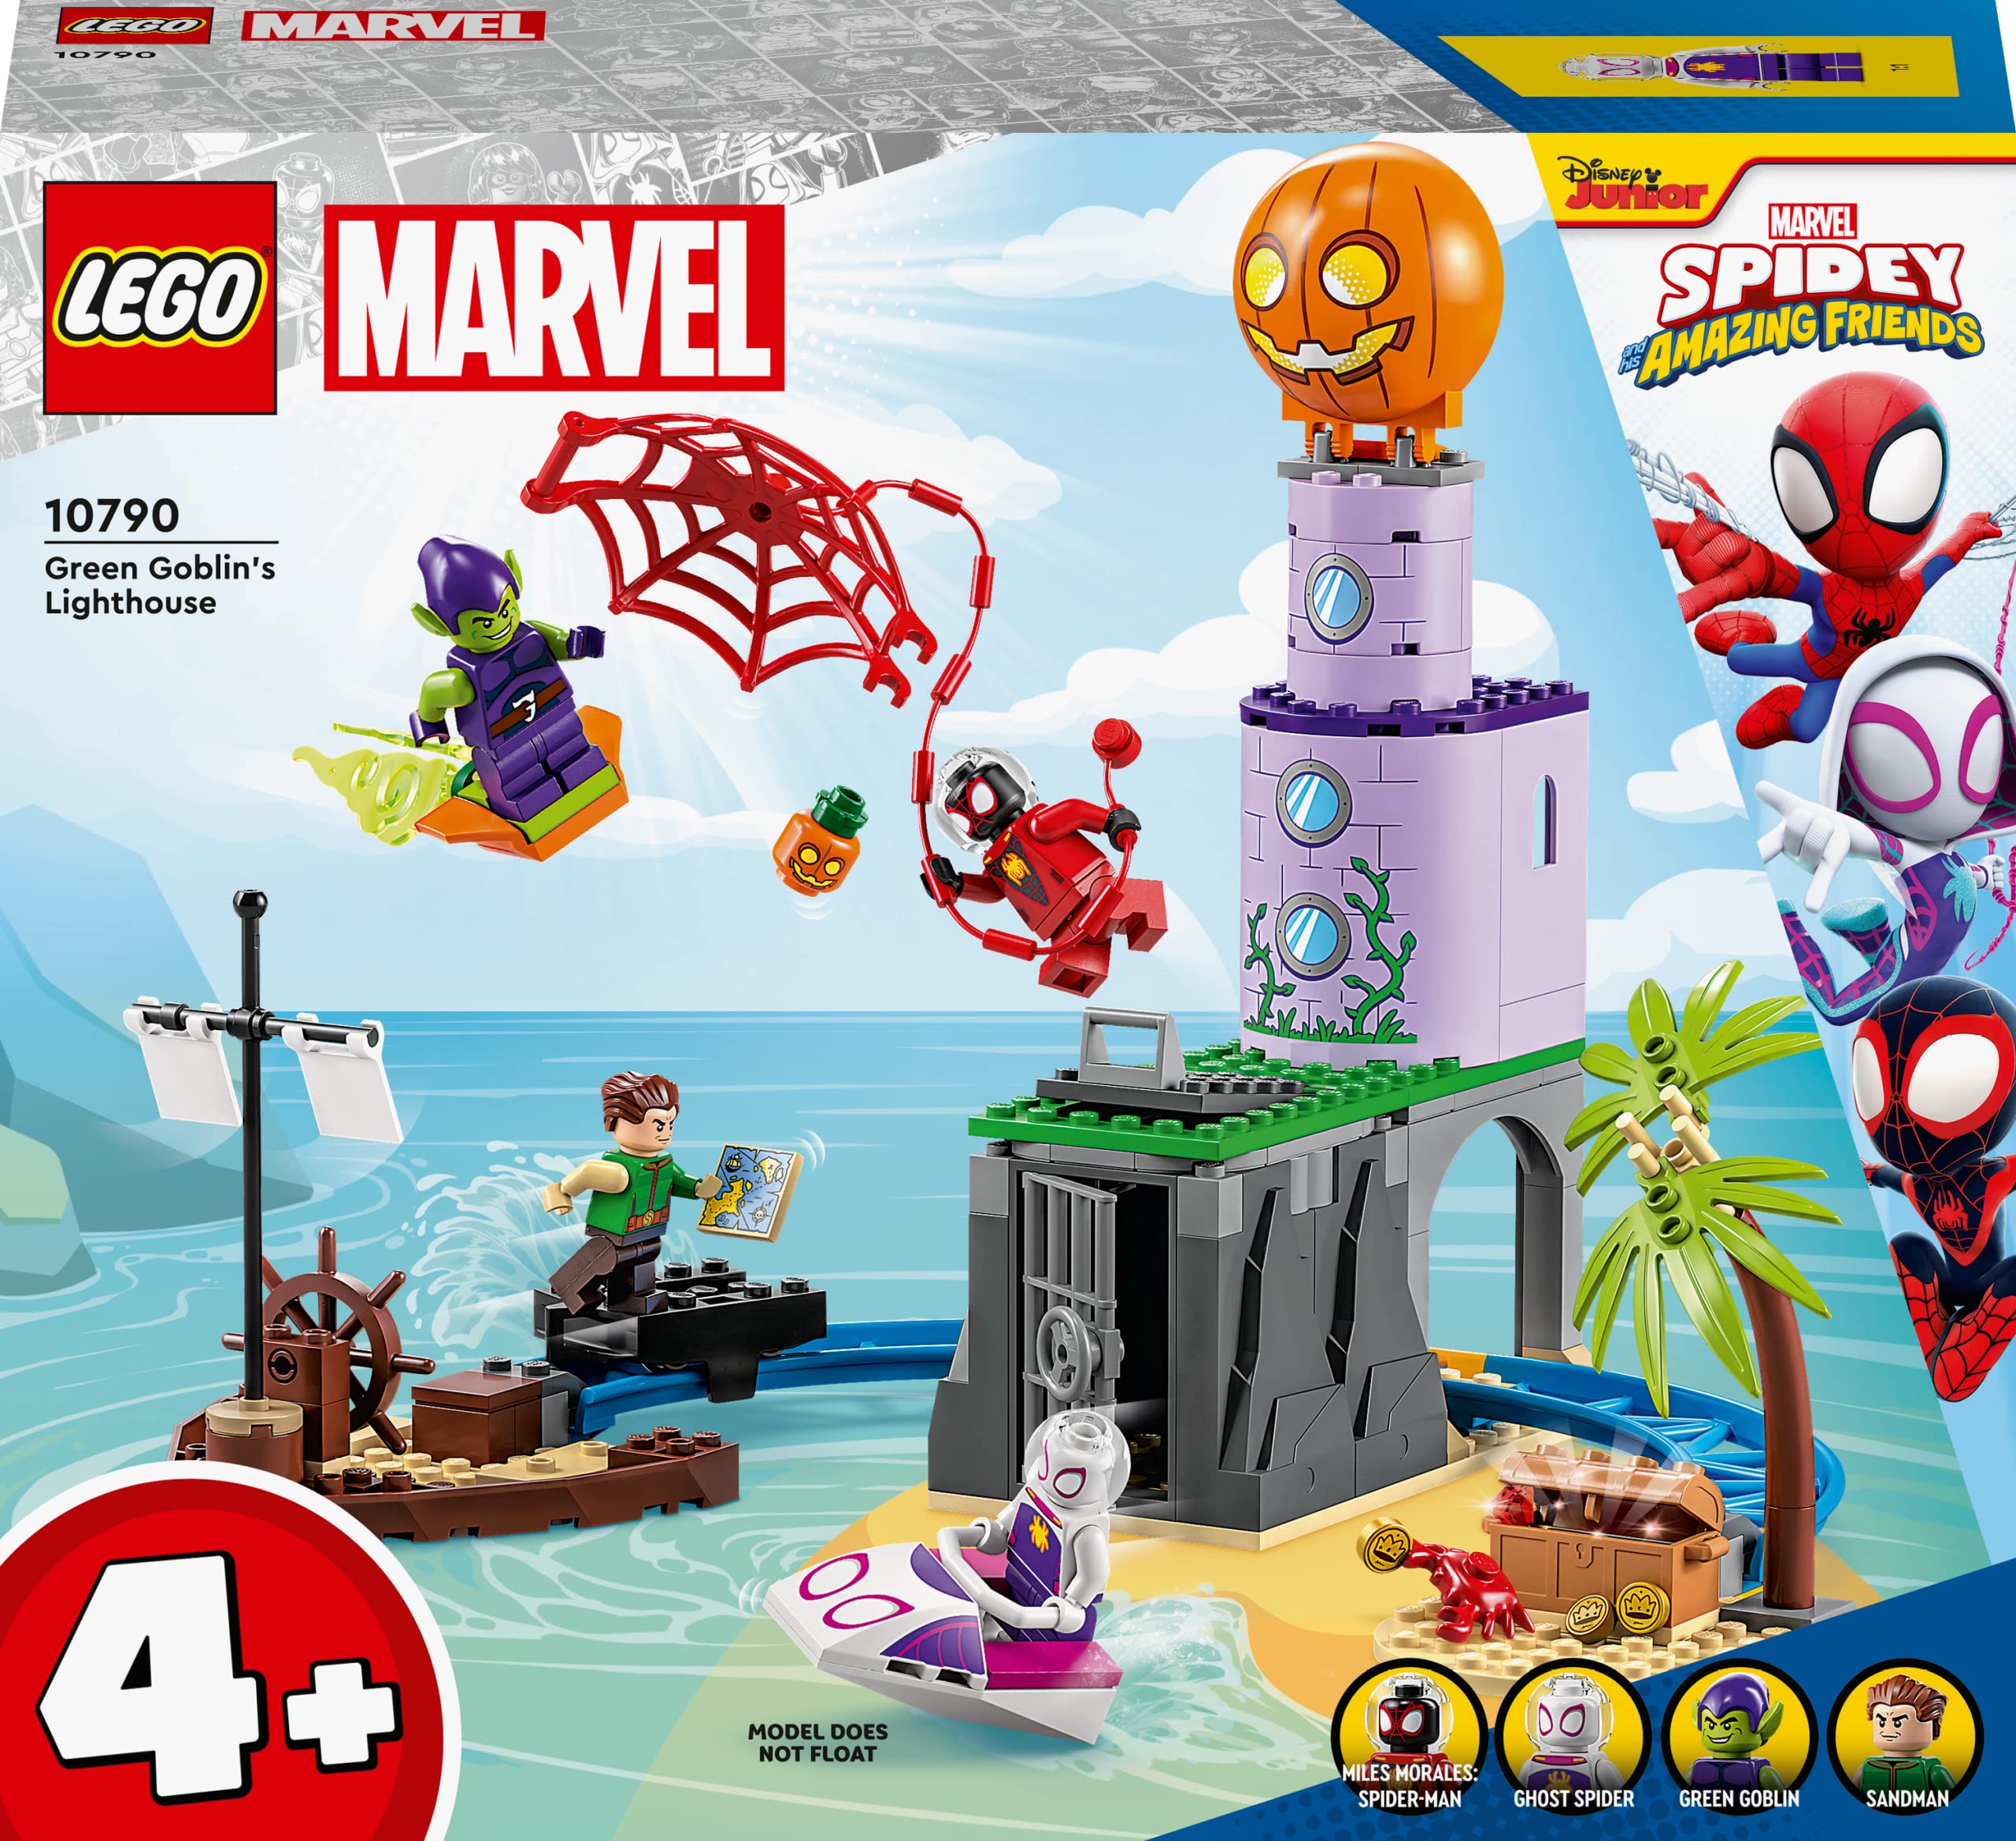 Lego Marvel Spidy and The Wow Friend: Green Goblin 10790 Toy Blocks, Present, American Comics, Superhero, Boys, Girls, 4 Years Old